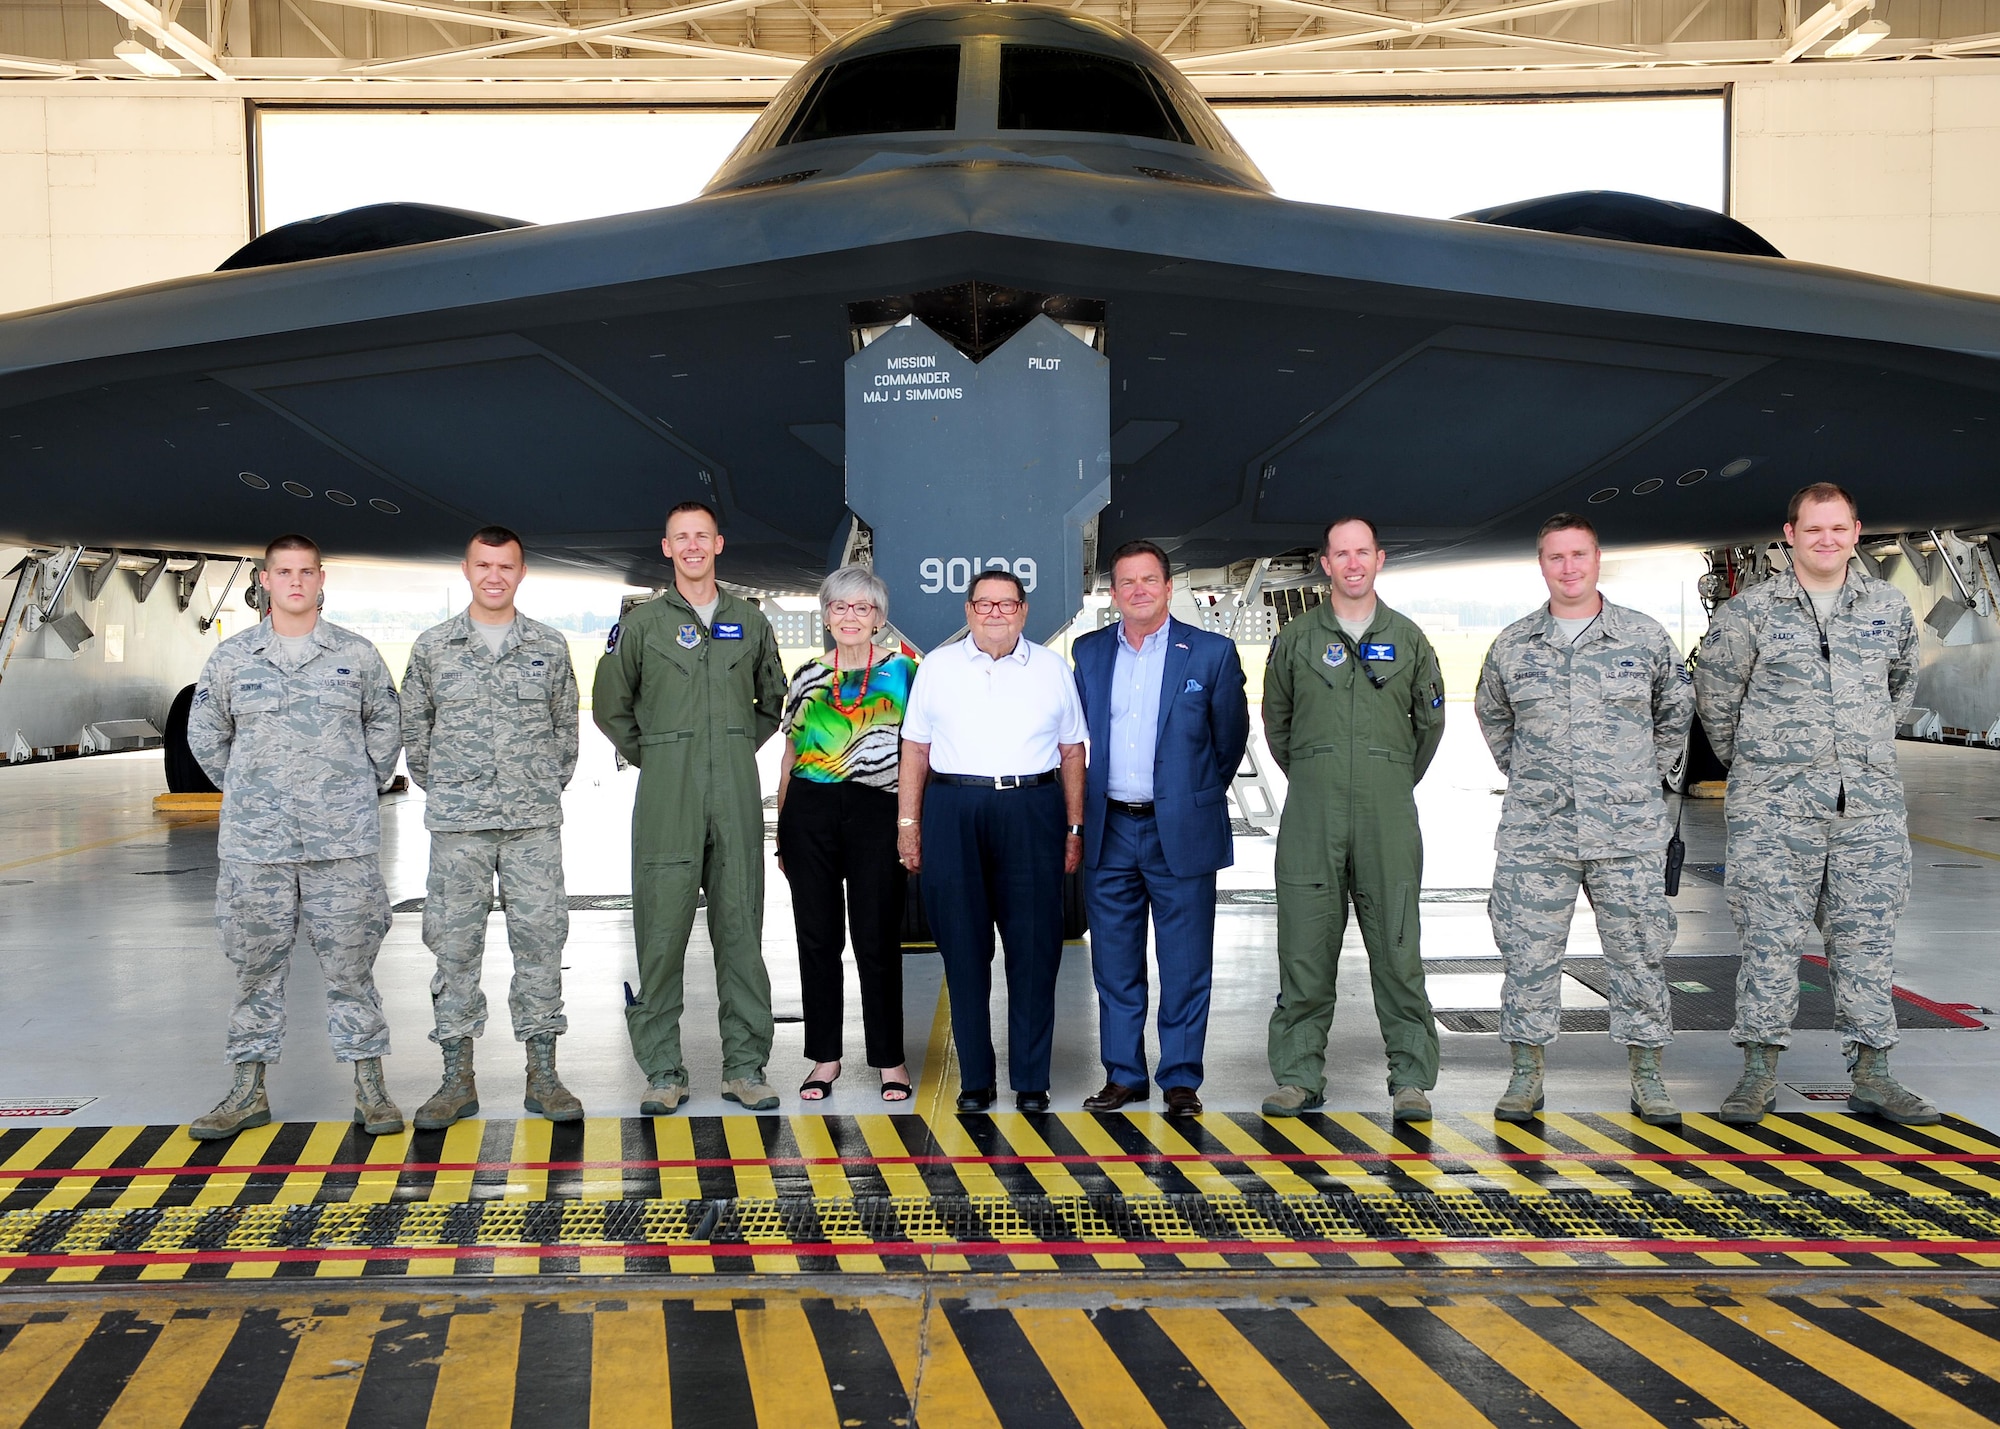 Retired U.S. Air Force Lt. Col. Robert Fortney, center, a former 13th Bomb Squadron (BS) commander, and his family tour the B-2 Spirit during their visit with Lt. Col. Matthew Newell, third from right, the current 13th BS commander, and fellow Team Whiteman members at Whiteman Air Force Base (AFB), Mo., July 26, 2016. During the Cuban Missile Crisis, Fortney was chief of the control division at Barksdale AFB, La. He later transferred to Andersen AFB, Guam as the vice commander from June 1966 through July 1968. While at Andersen, he flew numerous B-52 Stratofortress missions over Vietnam. In 1968, he served as base commander of Blytheville AFB, Ark., until his retirement in June 1971. (U.S Air Force photo by Airman 1st Class Jazmin Smith)